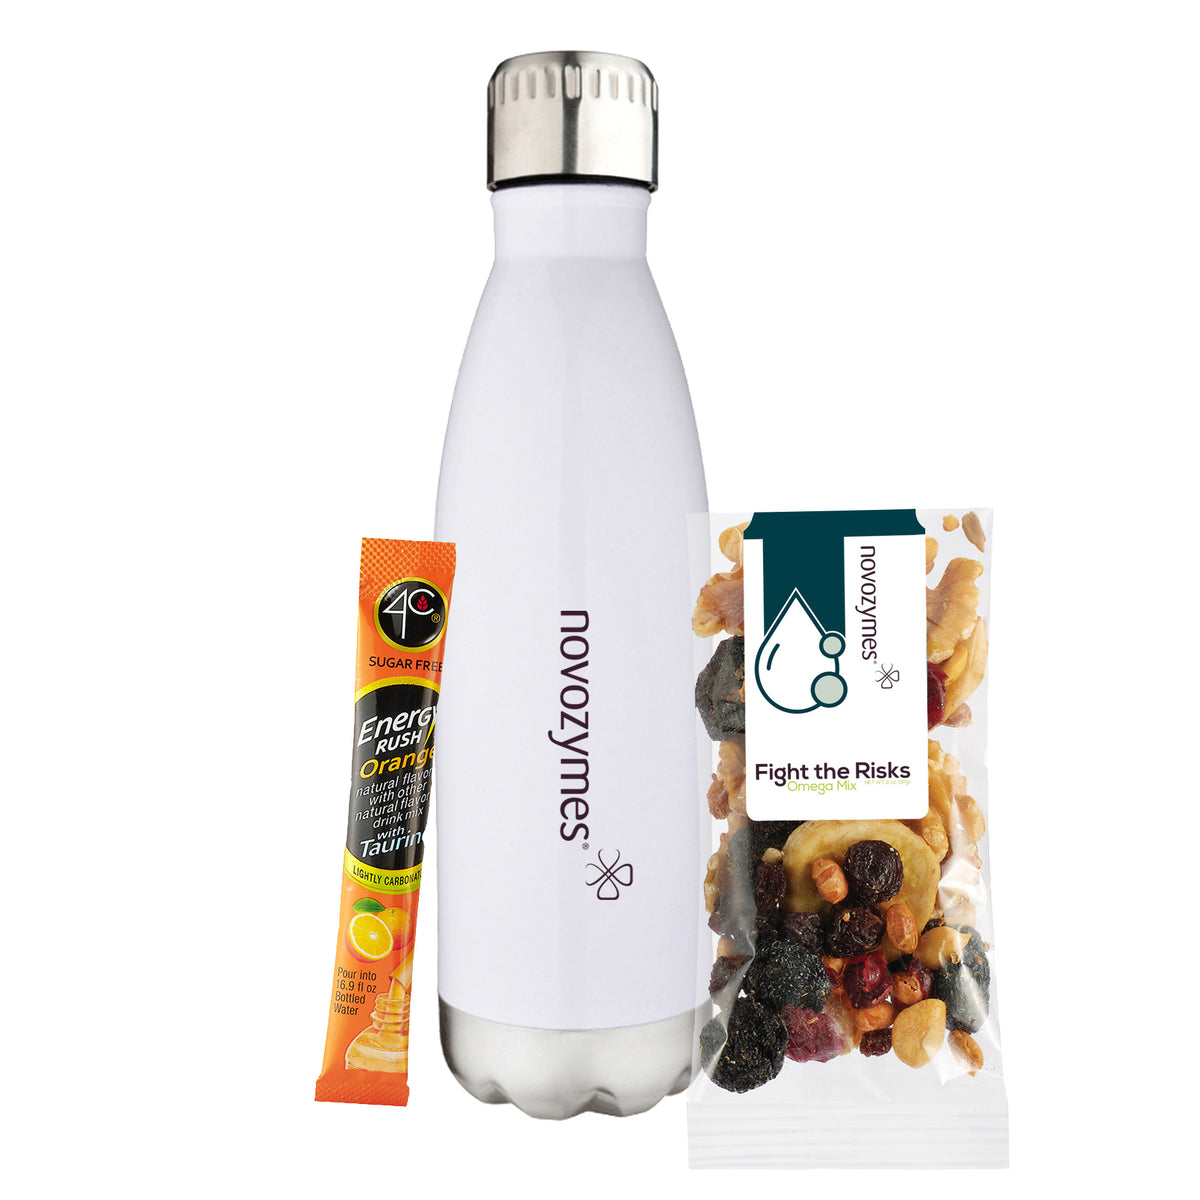 Water Bottle - 17 oz., 4C® Sugar Free Energy Rush Packet &amp; Snack Pack with Omega Mix